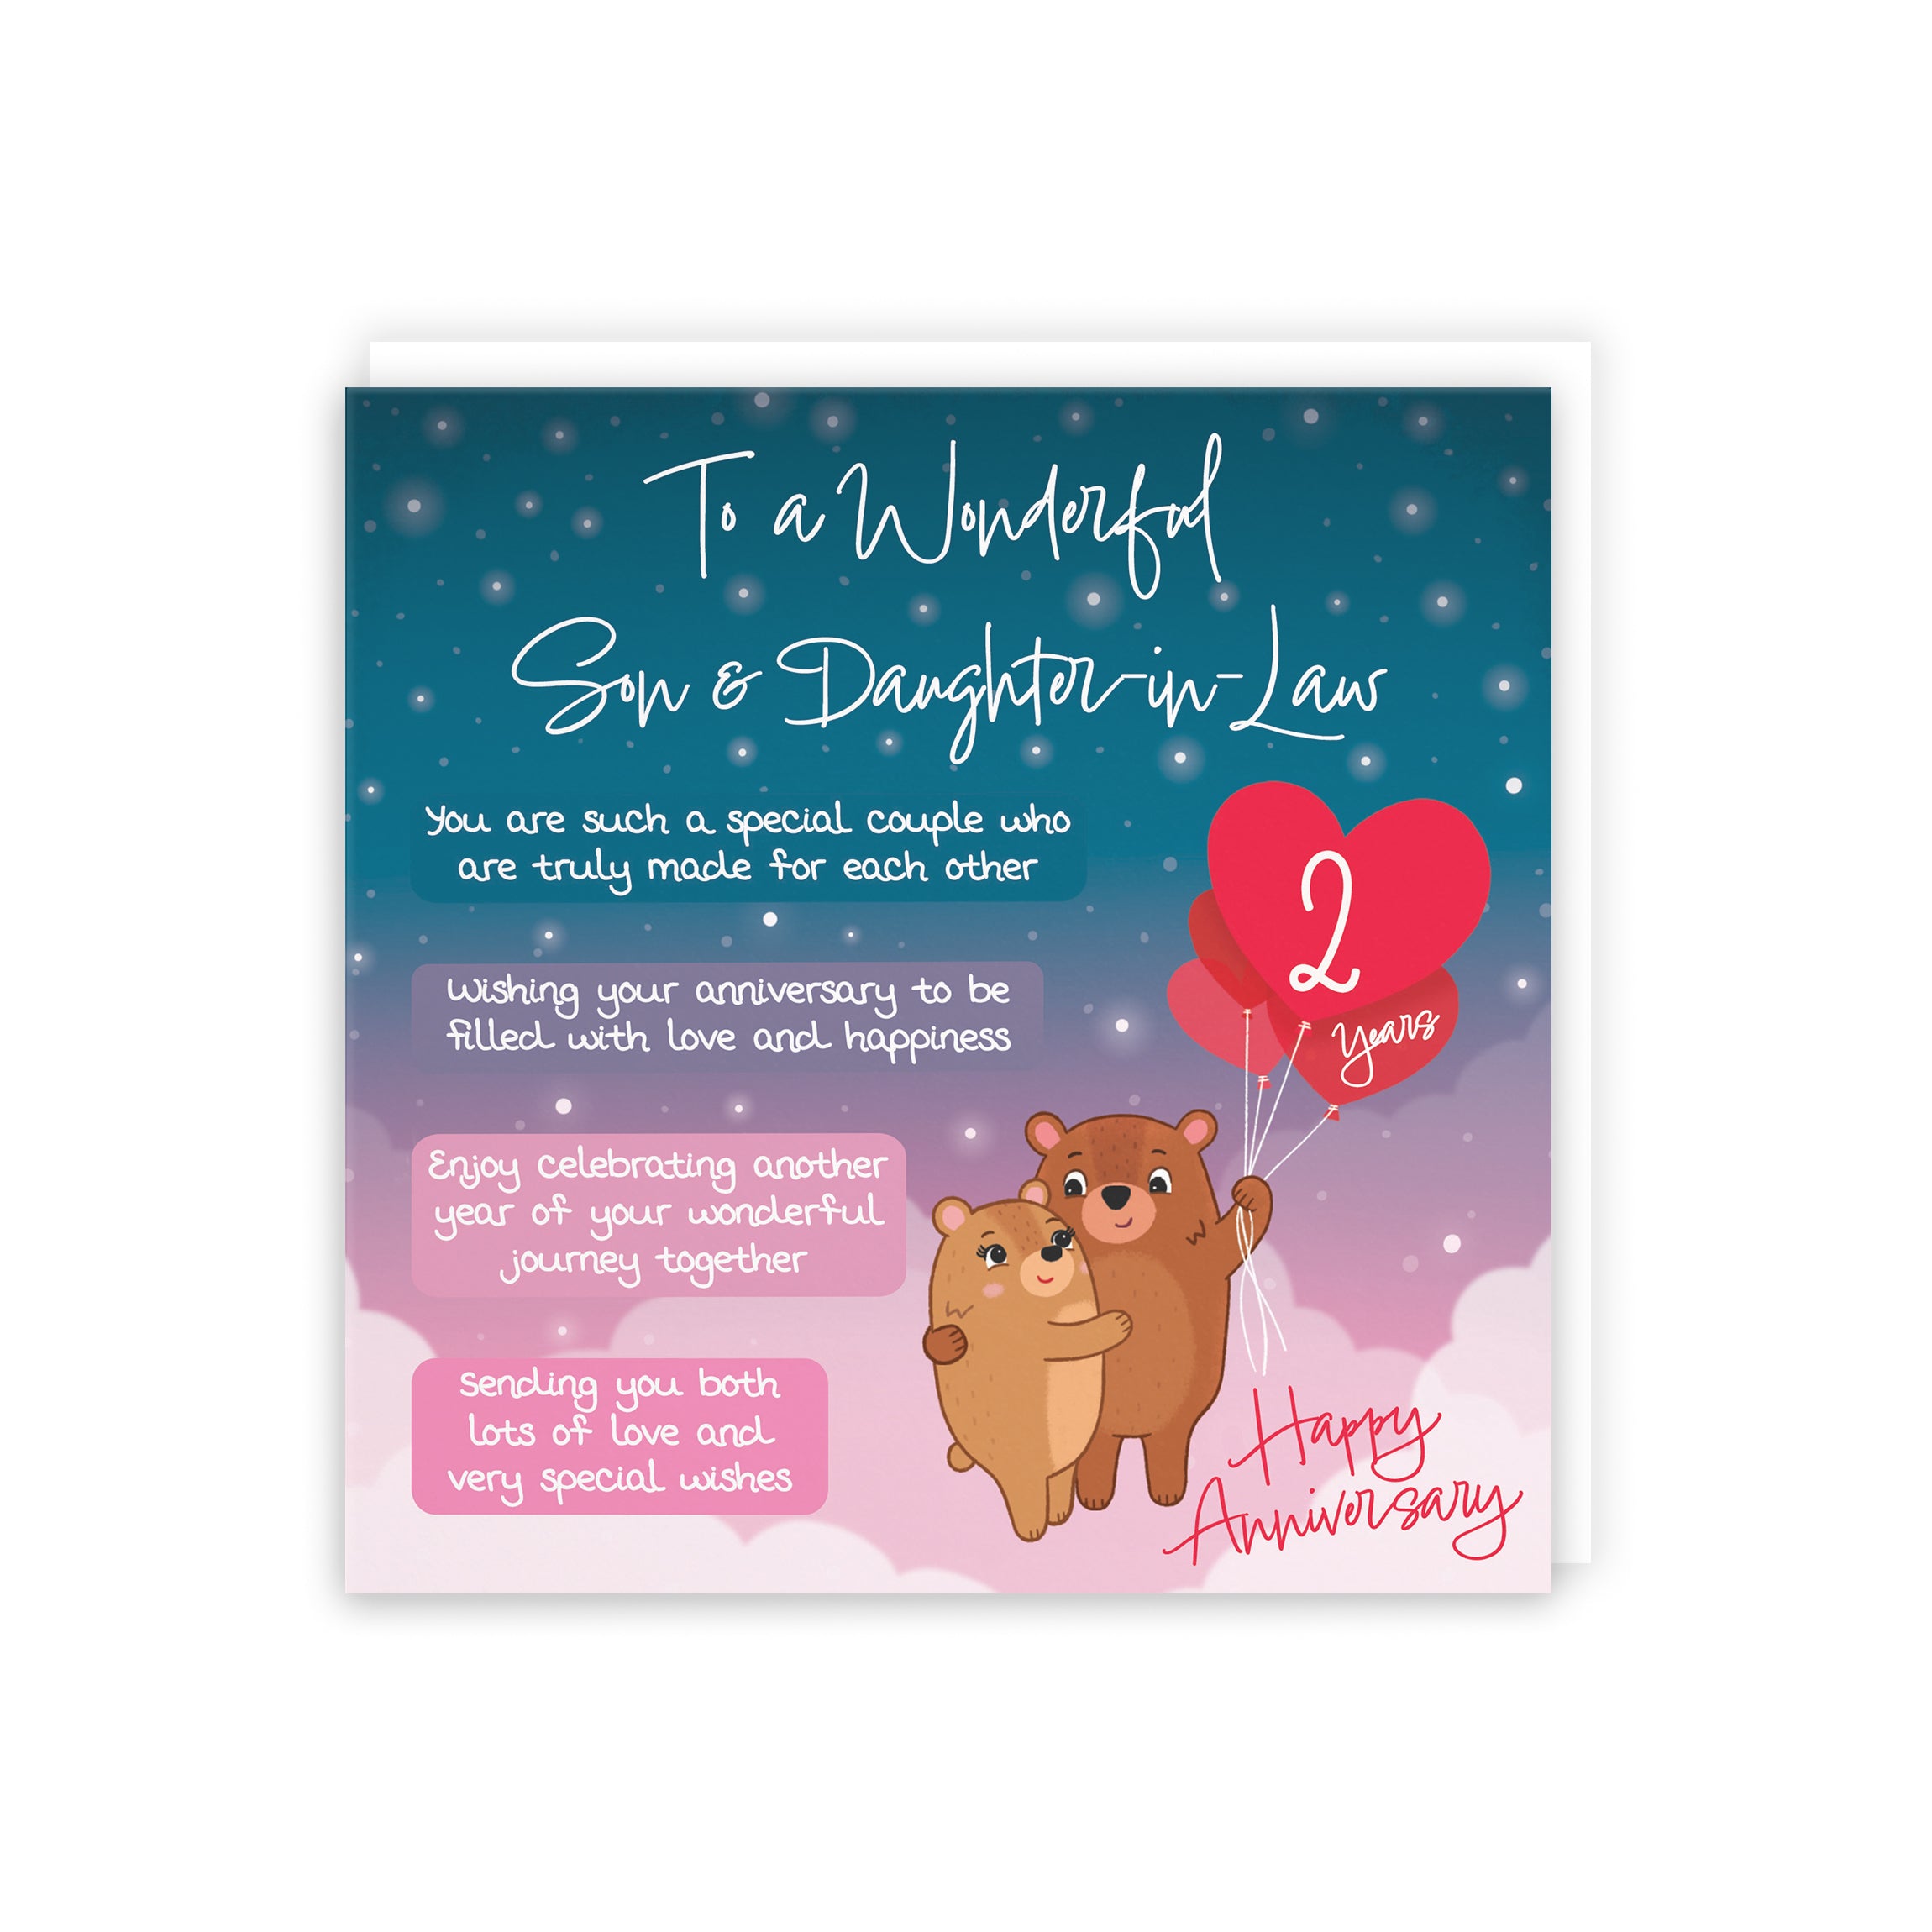 Son And Daughter In Law 2nd Anniversary Card Starry Night Cute Bears